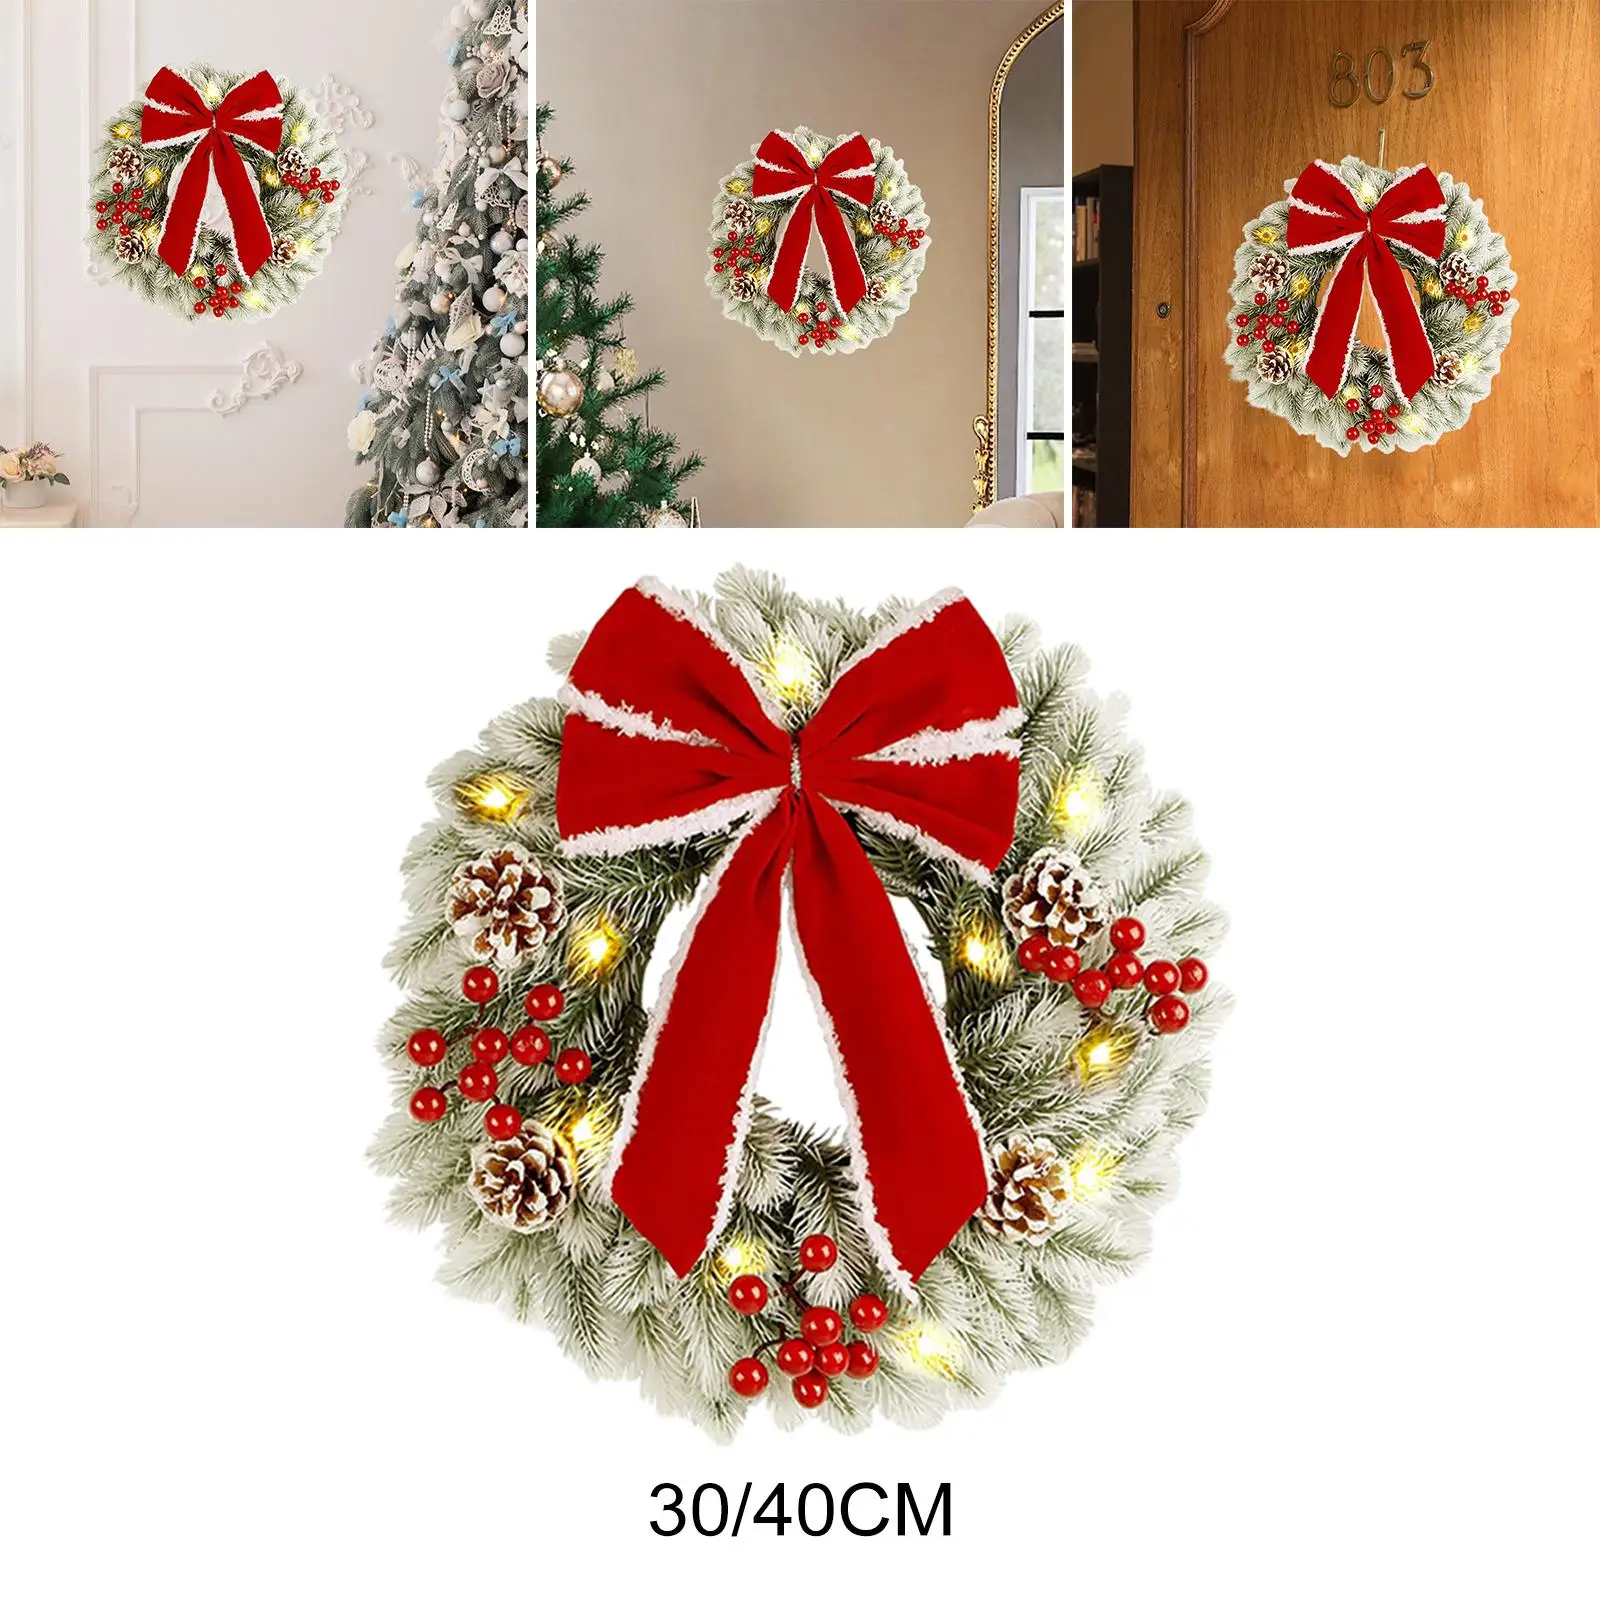 Christmas Wreath with String Light Warm White Lighting Decorative Door Ornaments for Office Wall Party Indoor Outdoor Ornament